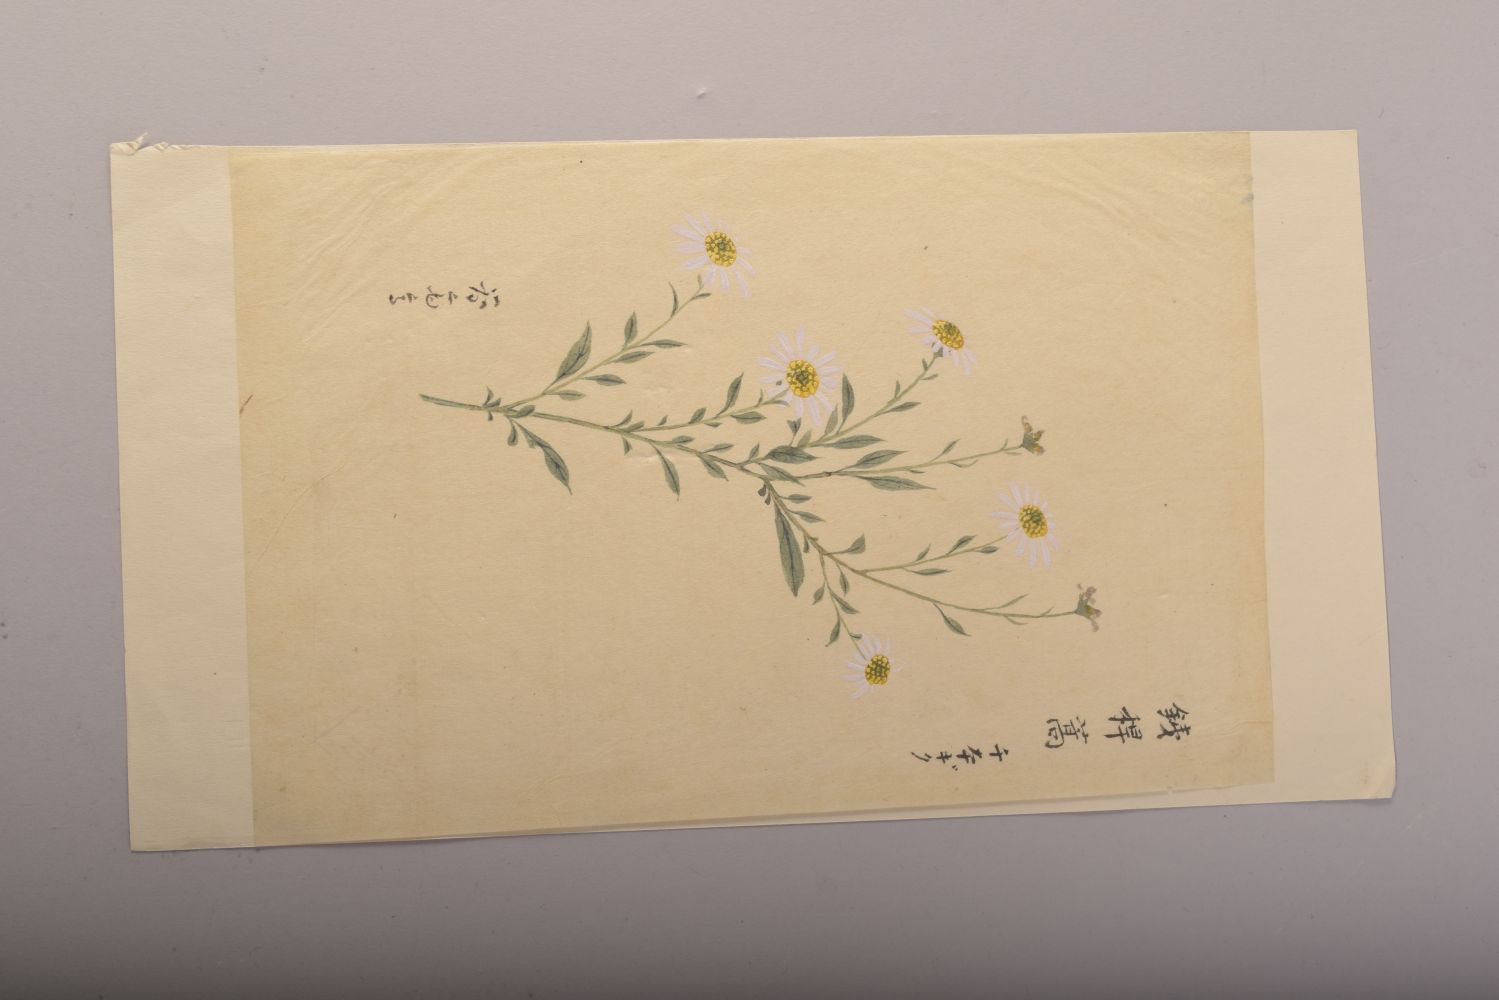 TWO JAPANESE MEIJI / TAISHO PAINTINGS OF FLOWERS ON PAPER, signed, image 27cm x 18cm and 28cm x 18. - Image 7 of 10